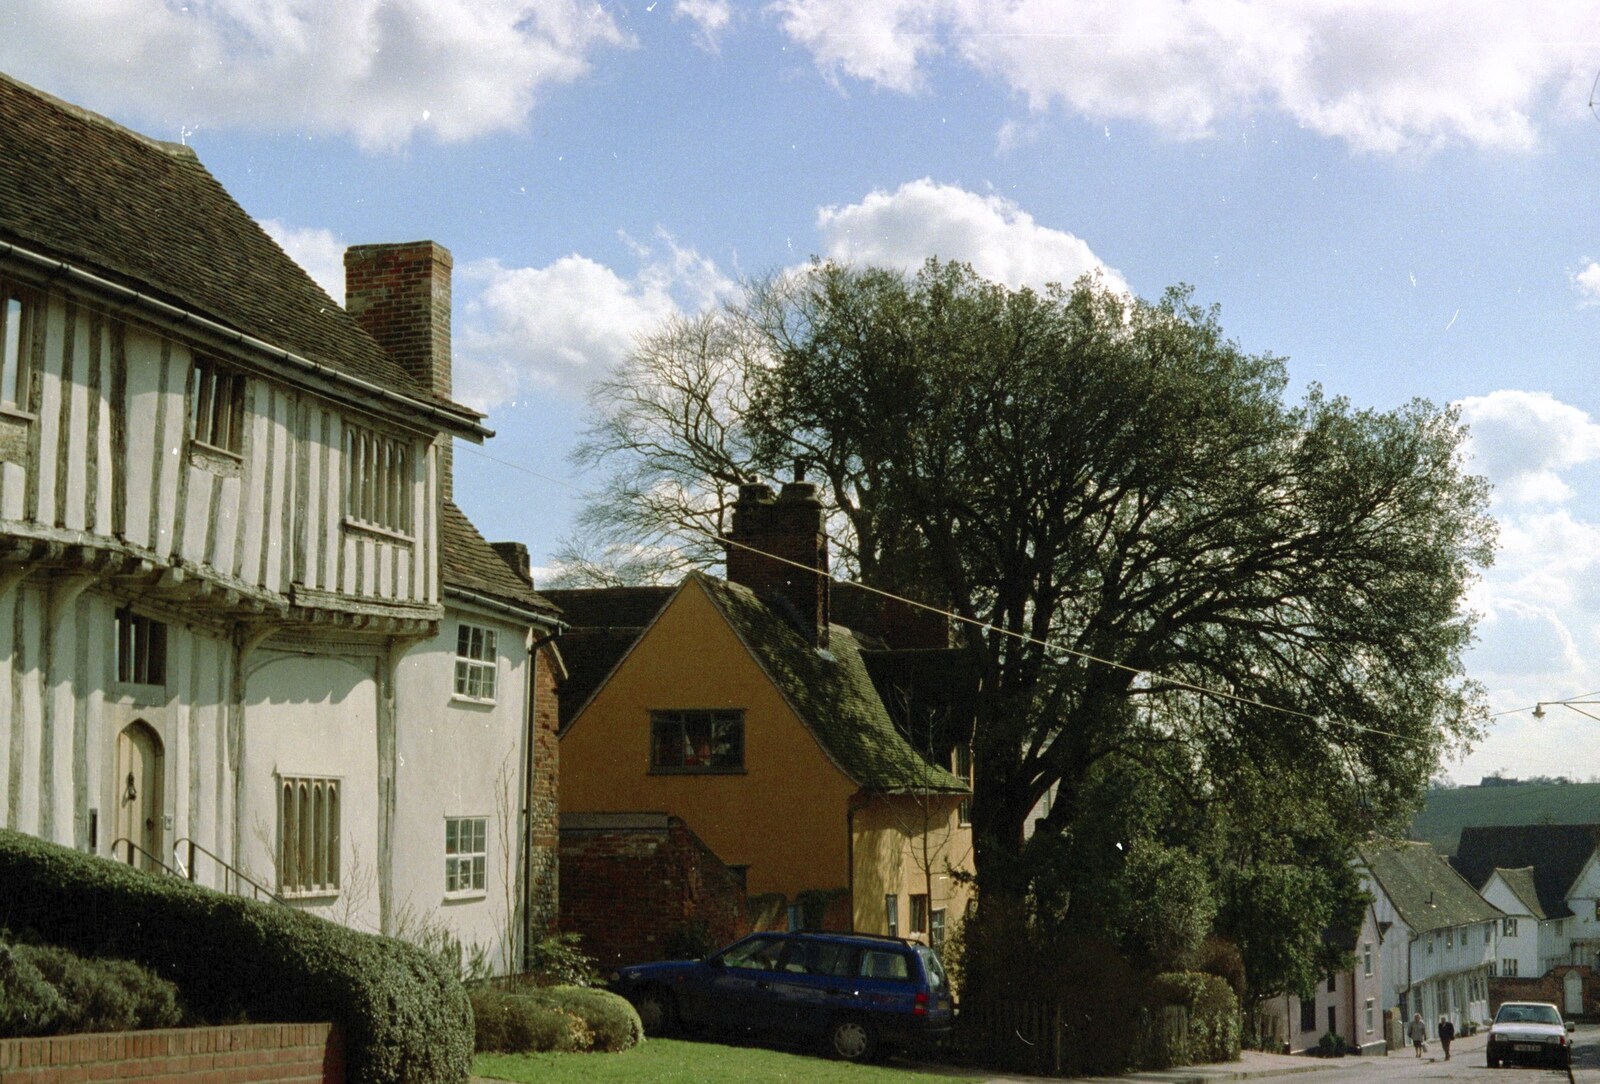 Lavenham houses from Mother and Mike Visit, Lavenham, Suffolk - 14th April 1996